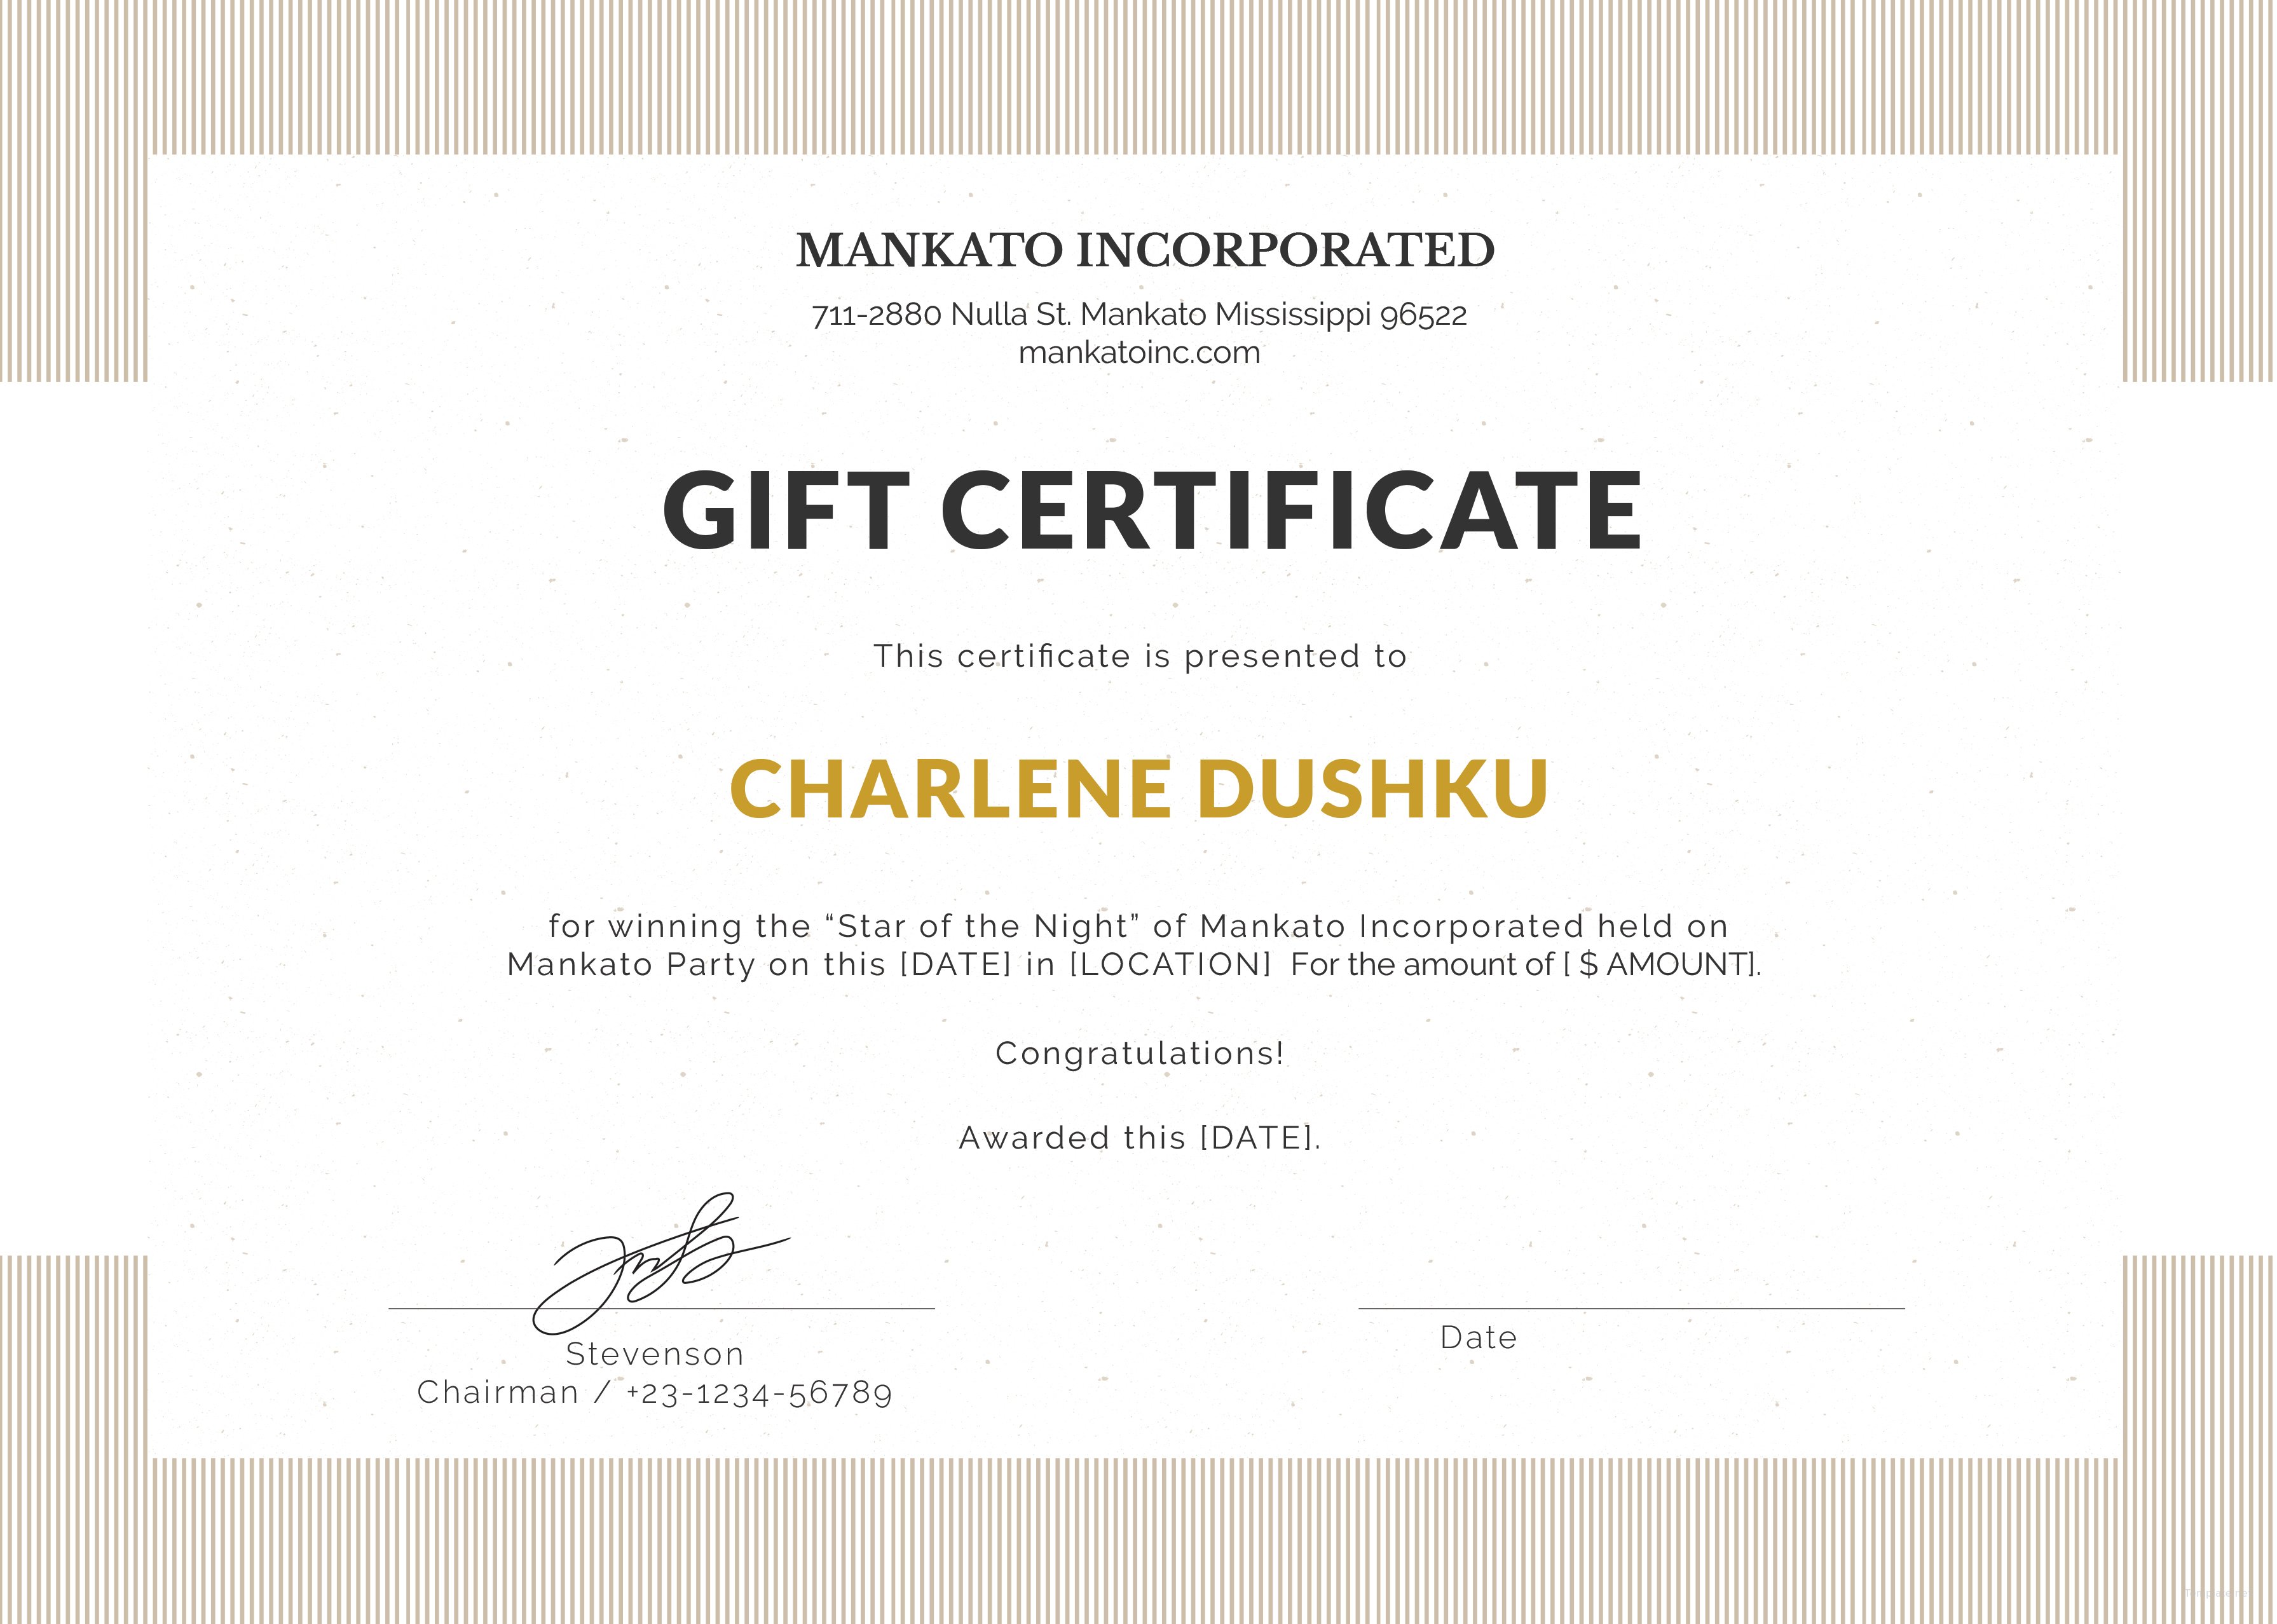 Free Gift Certificate Template in Microsoft Word Microsoft Publisher